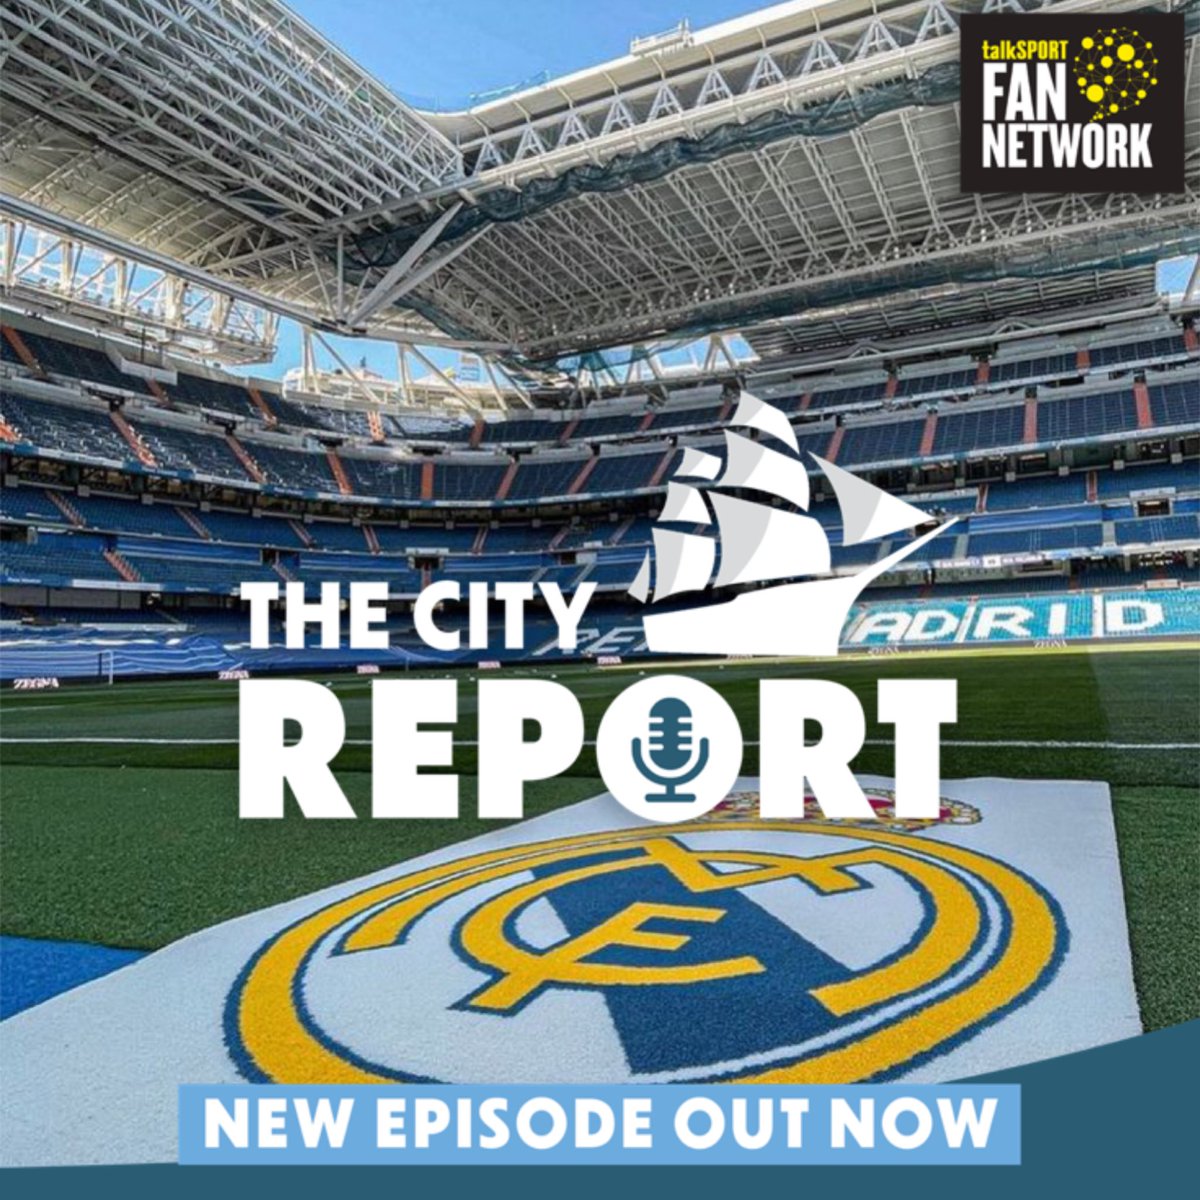 𝐂𝐨𝐦𝐩𝐥𝐞𝐭𝐞 𝐑𝐞𝐚𝐥 𝐌𝐚𝐝𝐫𝐢𝐝 𝐏𝐫𝐞𝐯𝐢𝐞𝐰 Join @abooker17, @CityReportPodOK & @4lex_mcfc for a preview to tonight’s MAMMOTH clash against Real Madrid! Listen now 🎧➡️ pod.link/1608600918/epi…